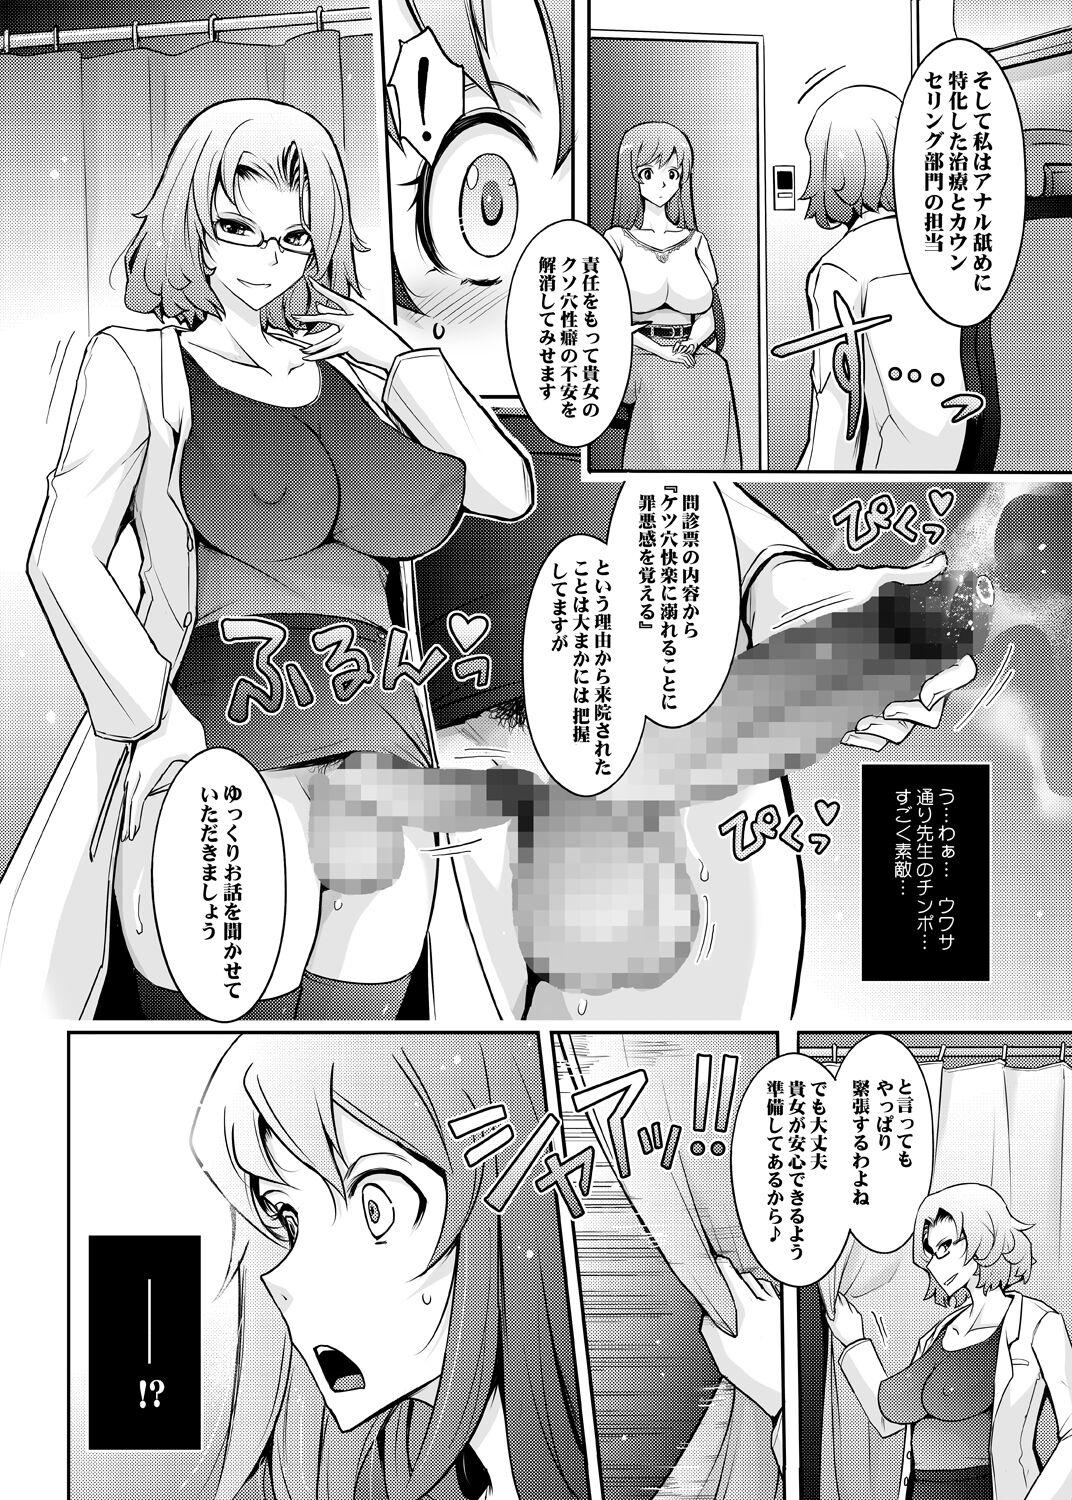 Spying 淫猥性癖全肯定クリニック 肛穴口淫科 - Original Transexual - Page 8